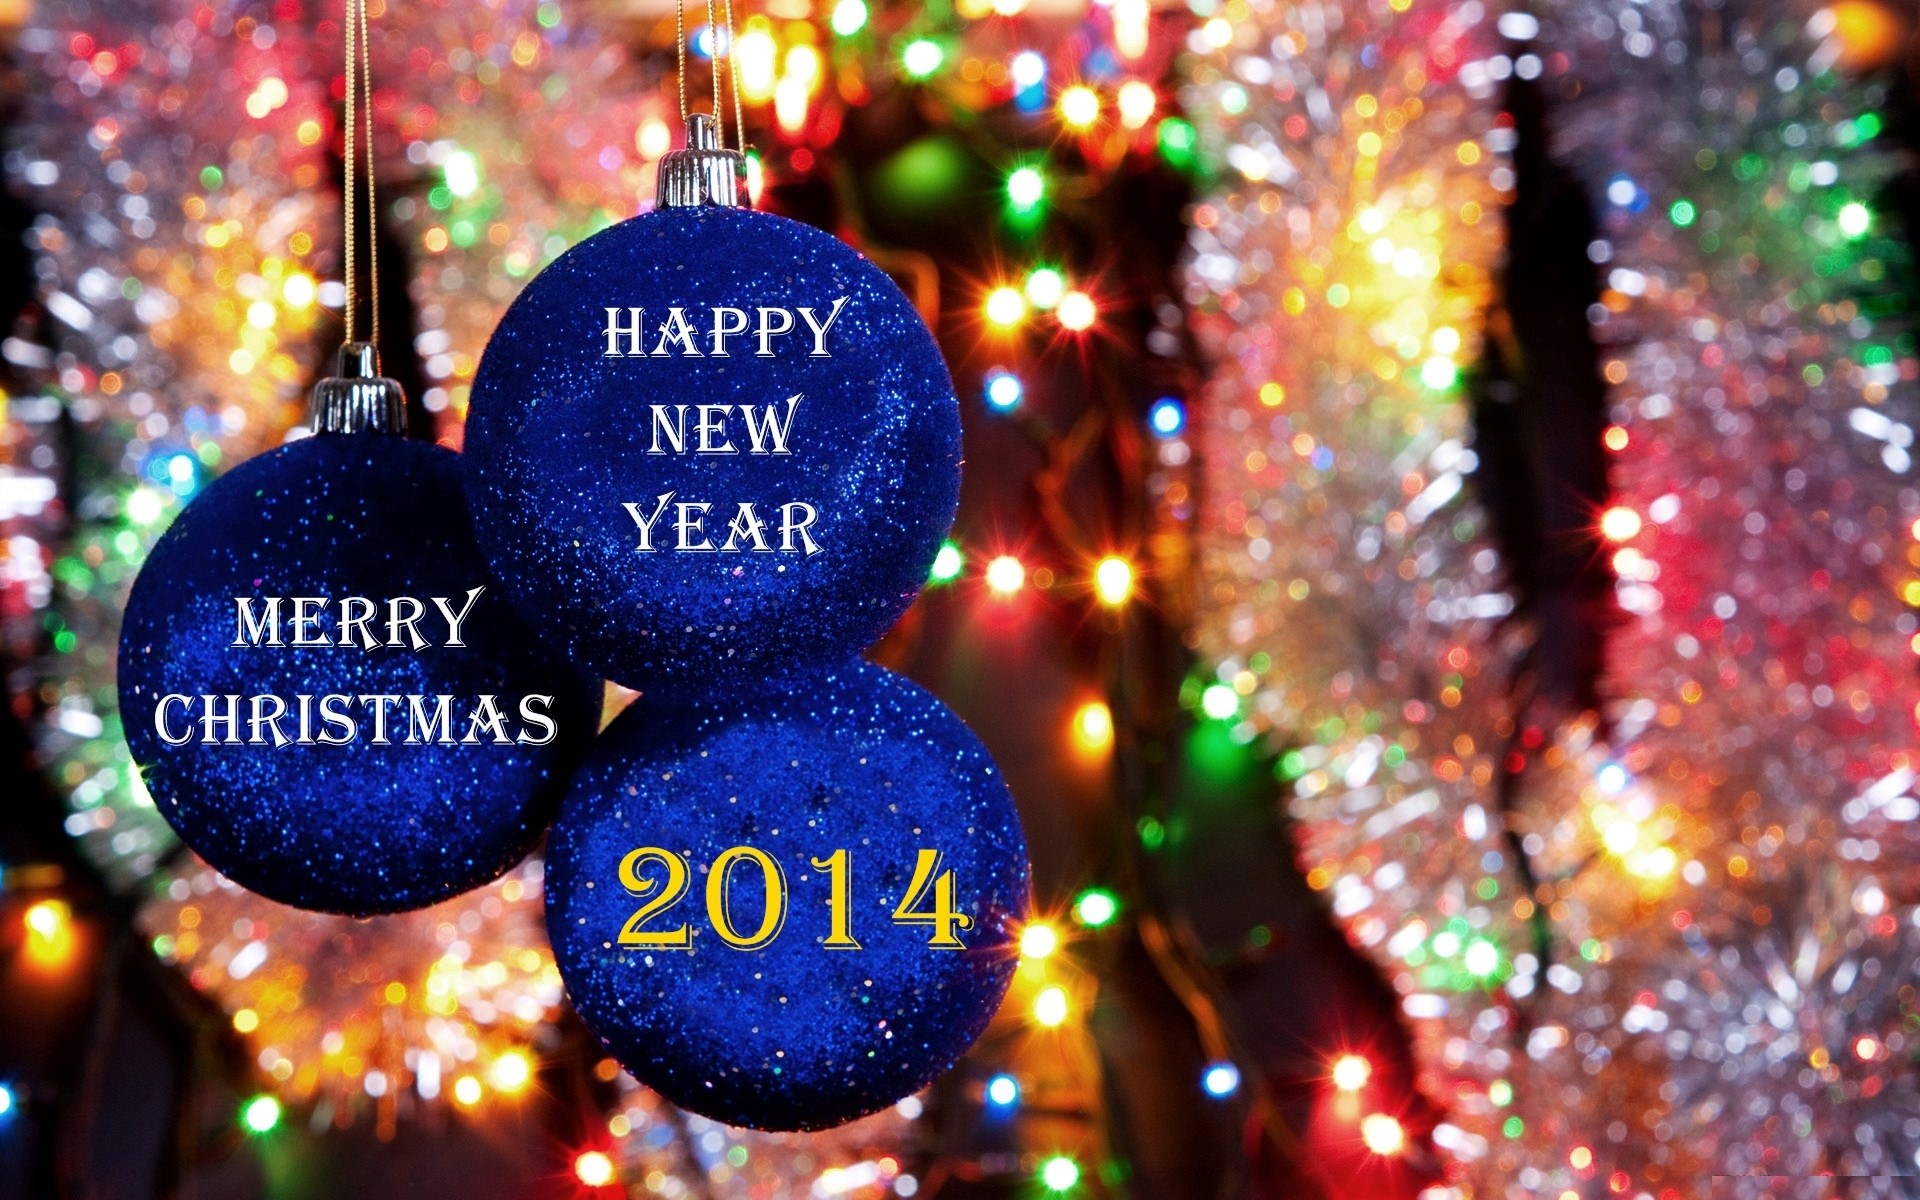 Merry Christmas 2014 New Year Wallpaper Download - Merry Christmas And New Year - HD Wallpaper 